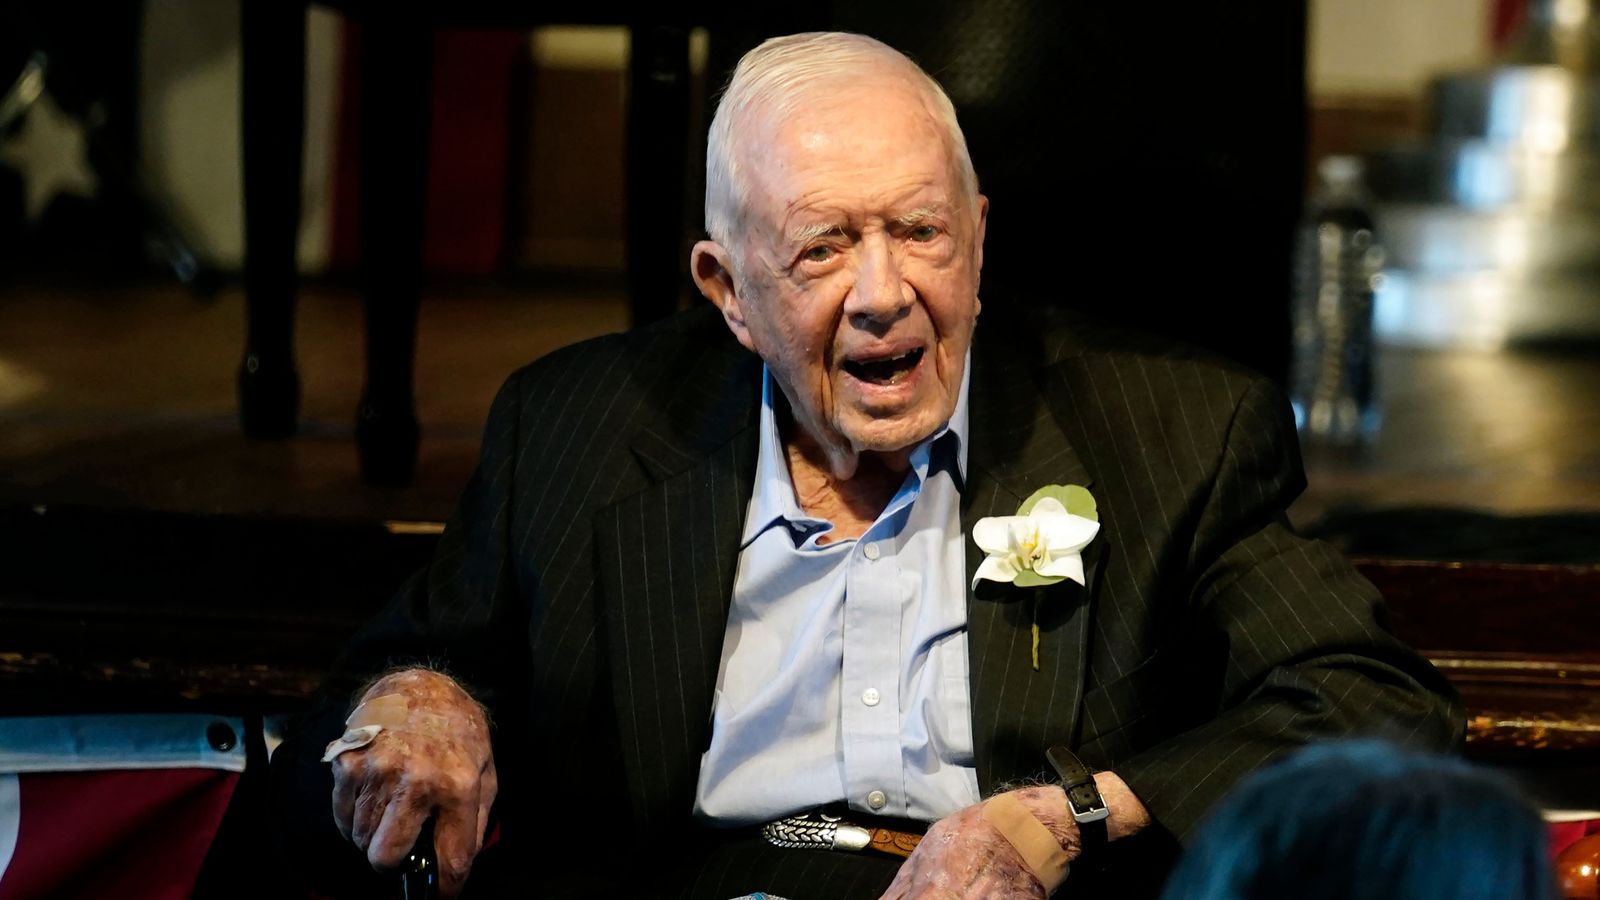 Former US president Jimmy Carter to receive hospice care at home after series of short hospital stays